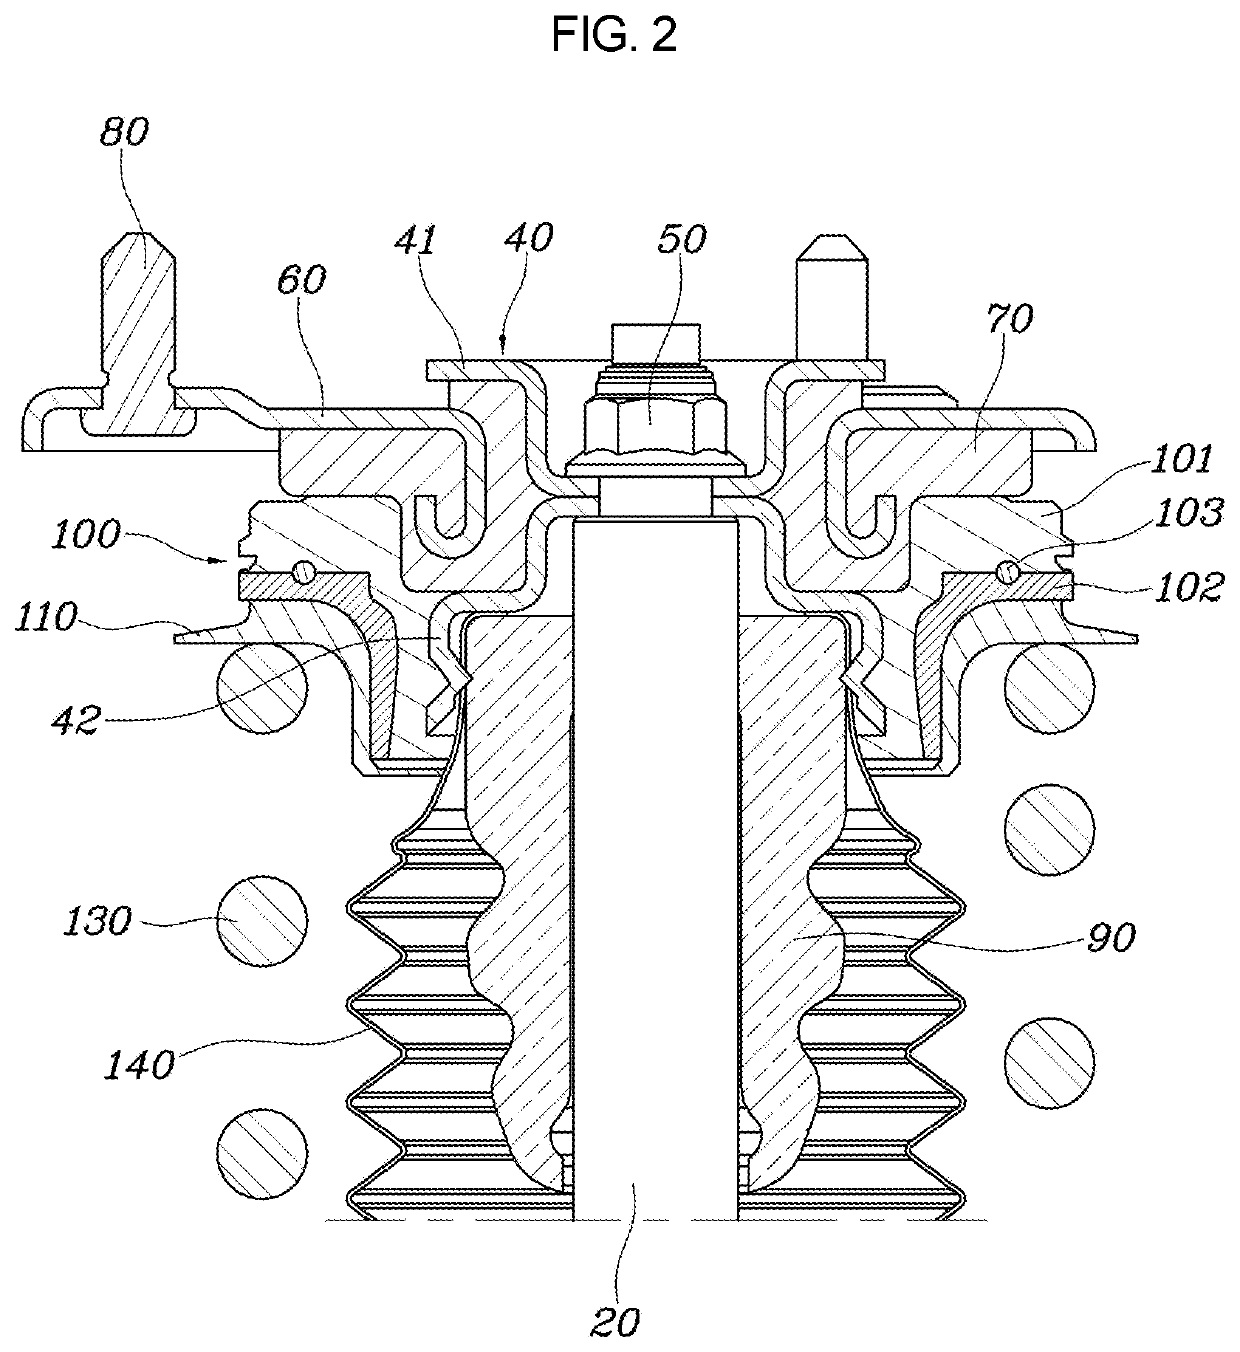 Shock absorber for vehicle